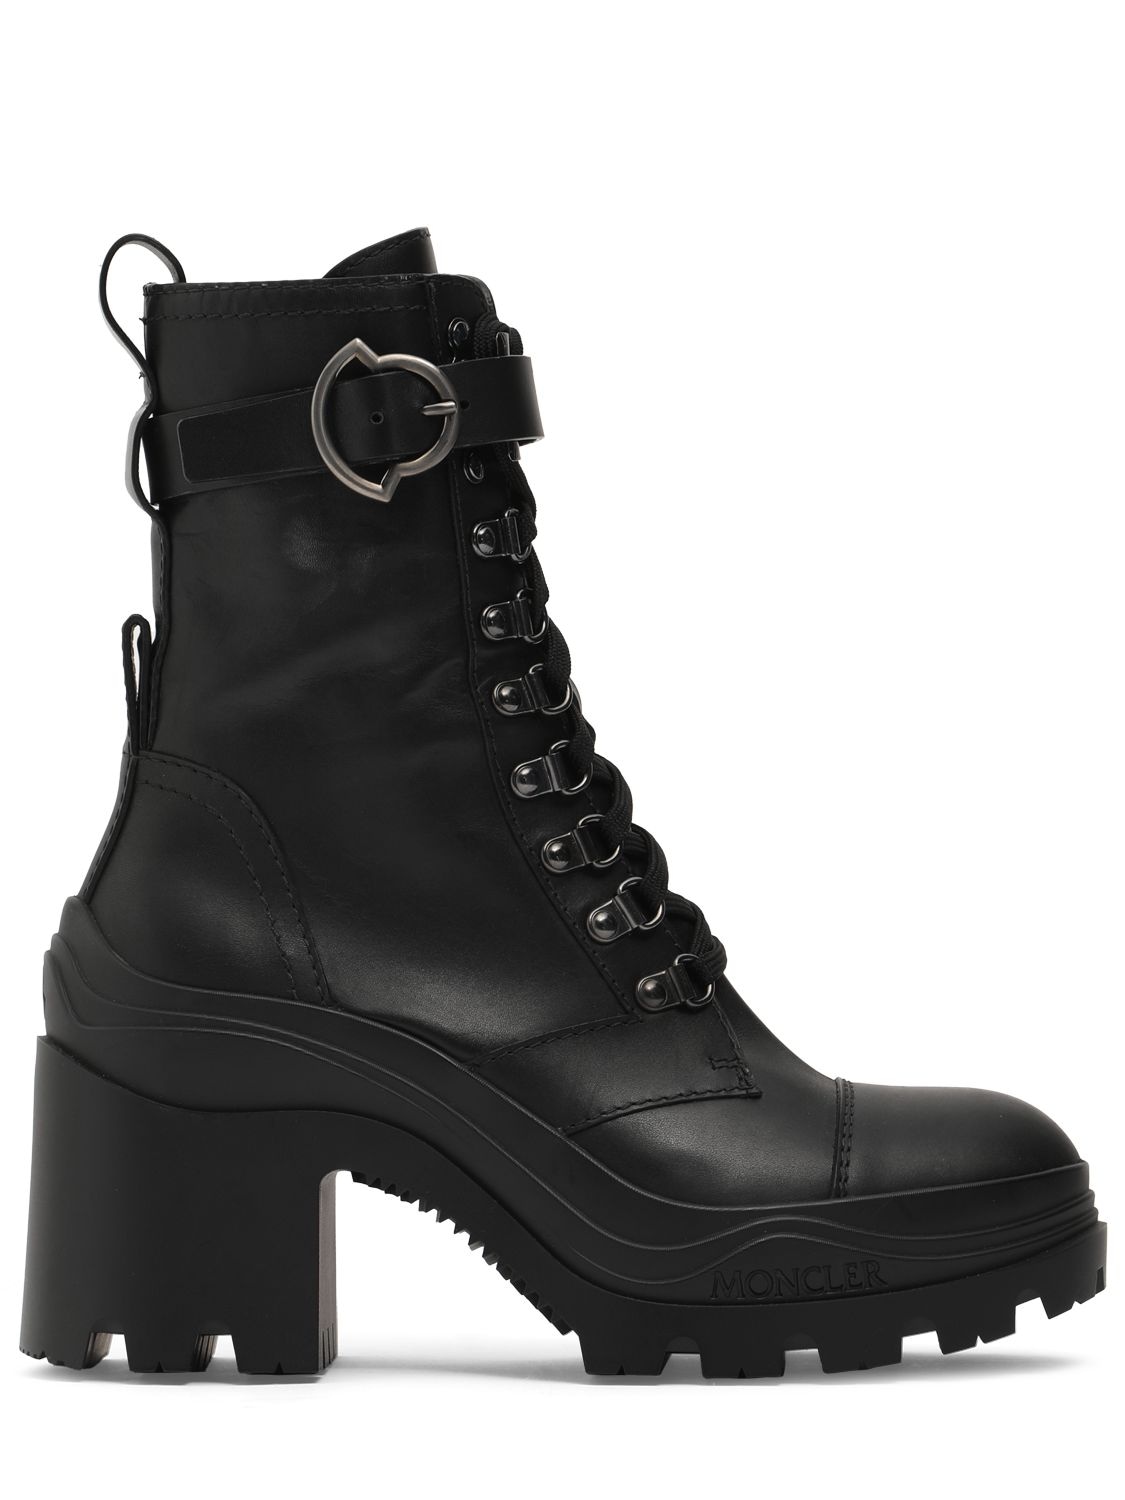 MONCLER 80MM ENVILE BUCKLE LEATHER ANKLE BOOTS